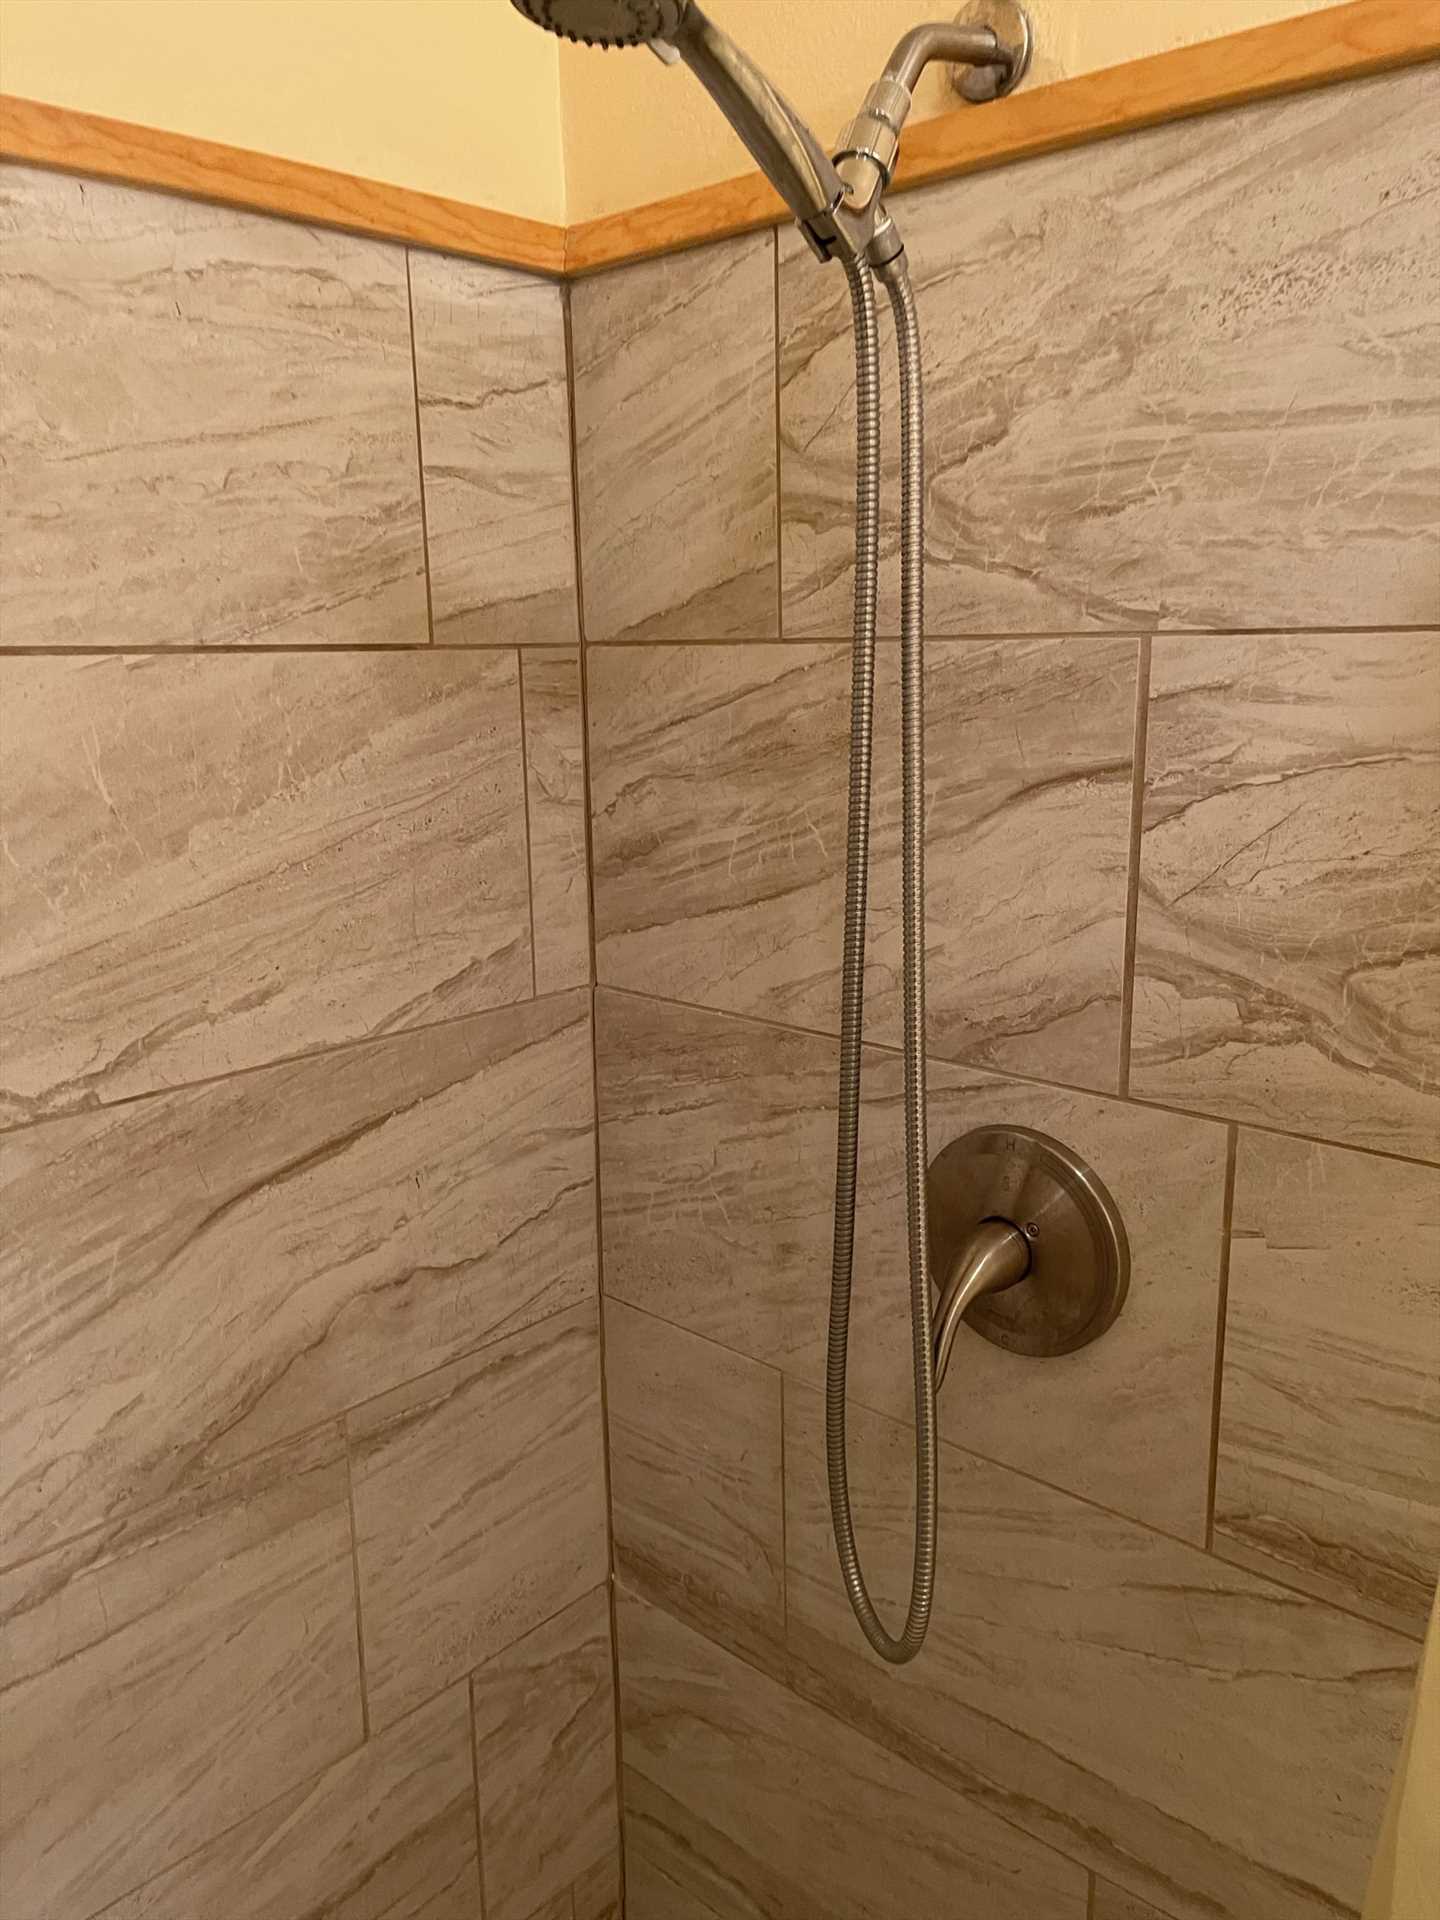                                                 A classy space for cleanup! This is the shower stall in the master bath.